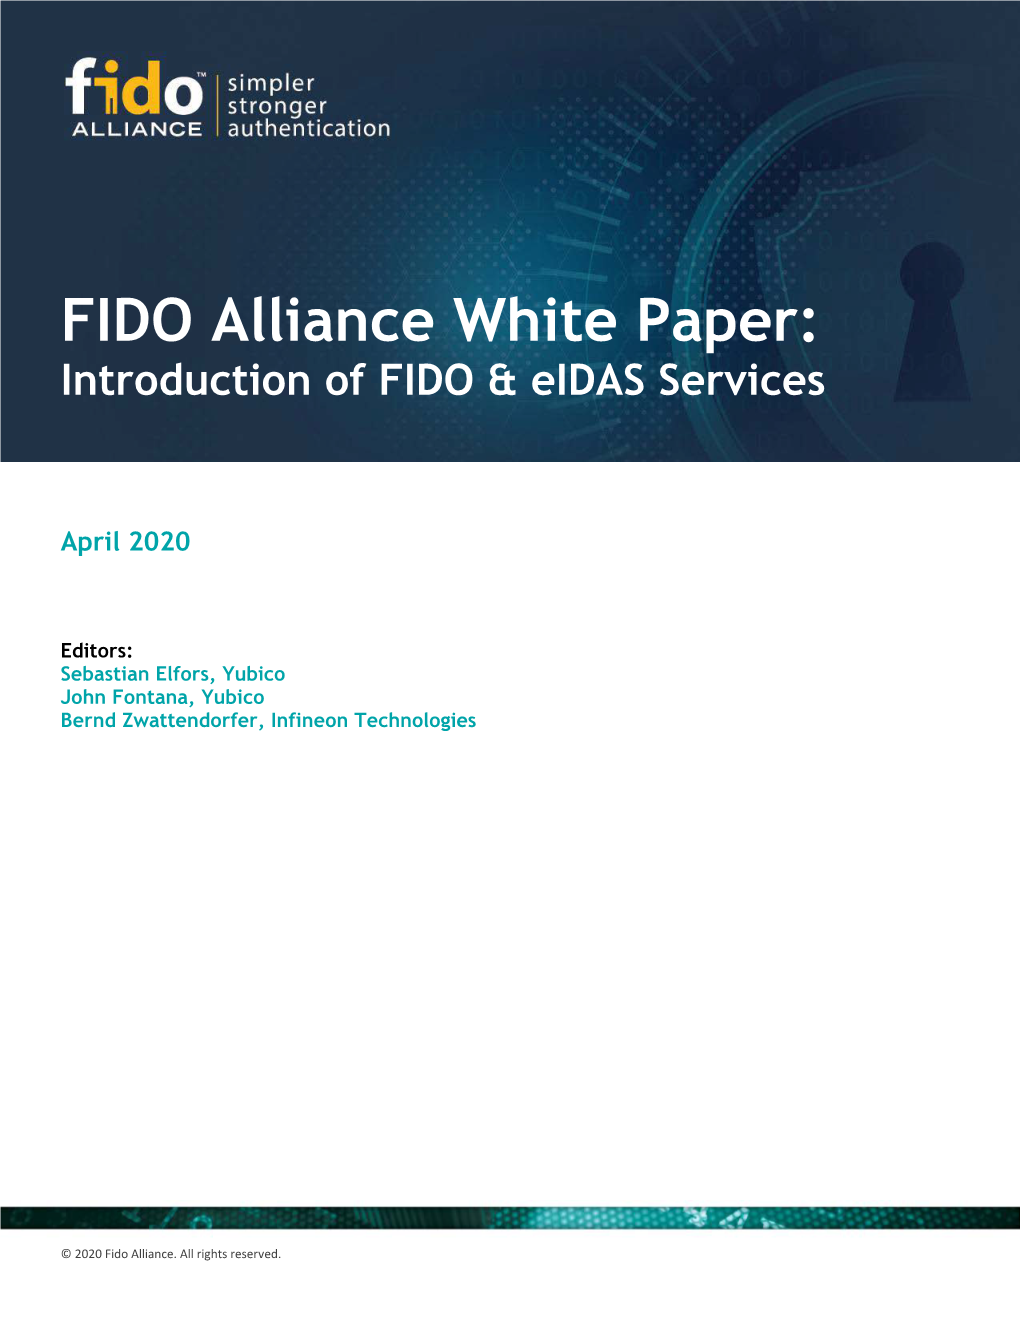 Introduction of FIDO and Eidas Services White Paper